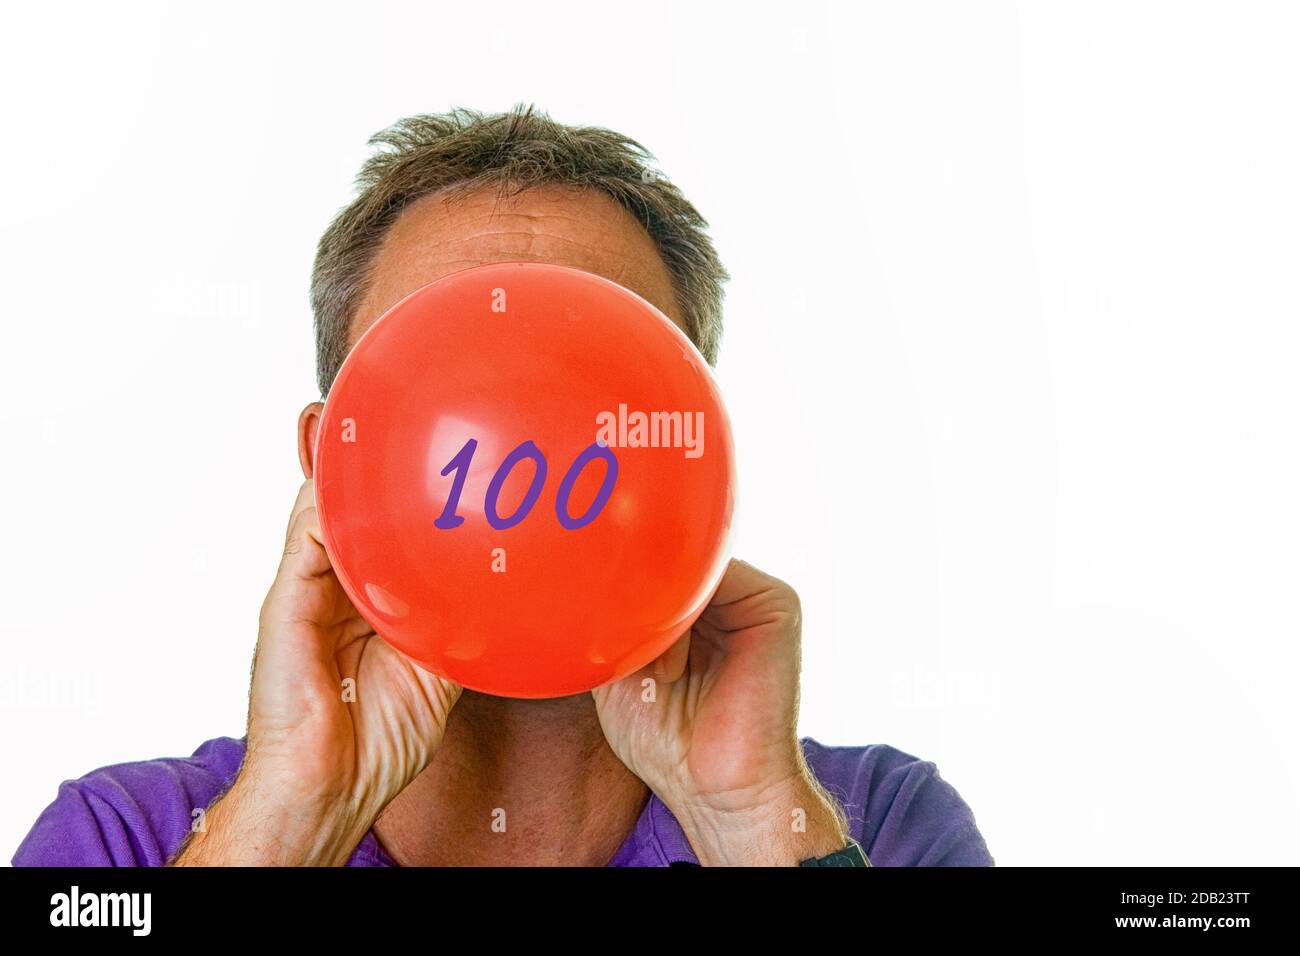 Man blowing red balloon with number 100 Stock Photo